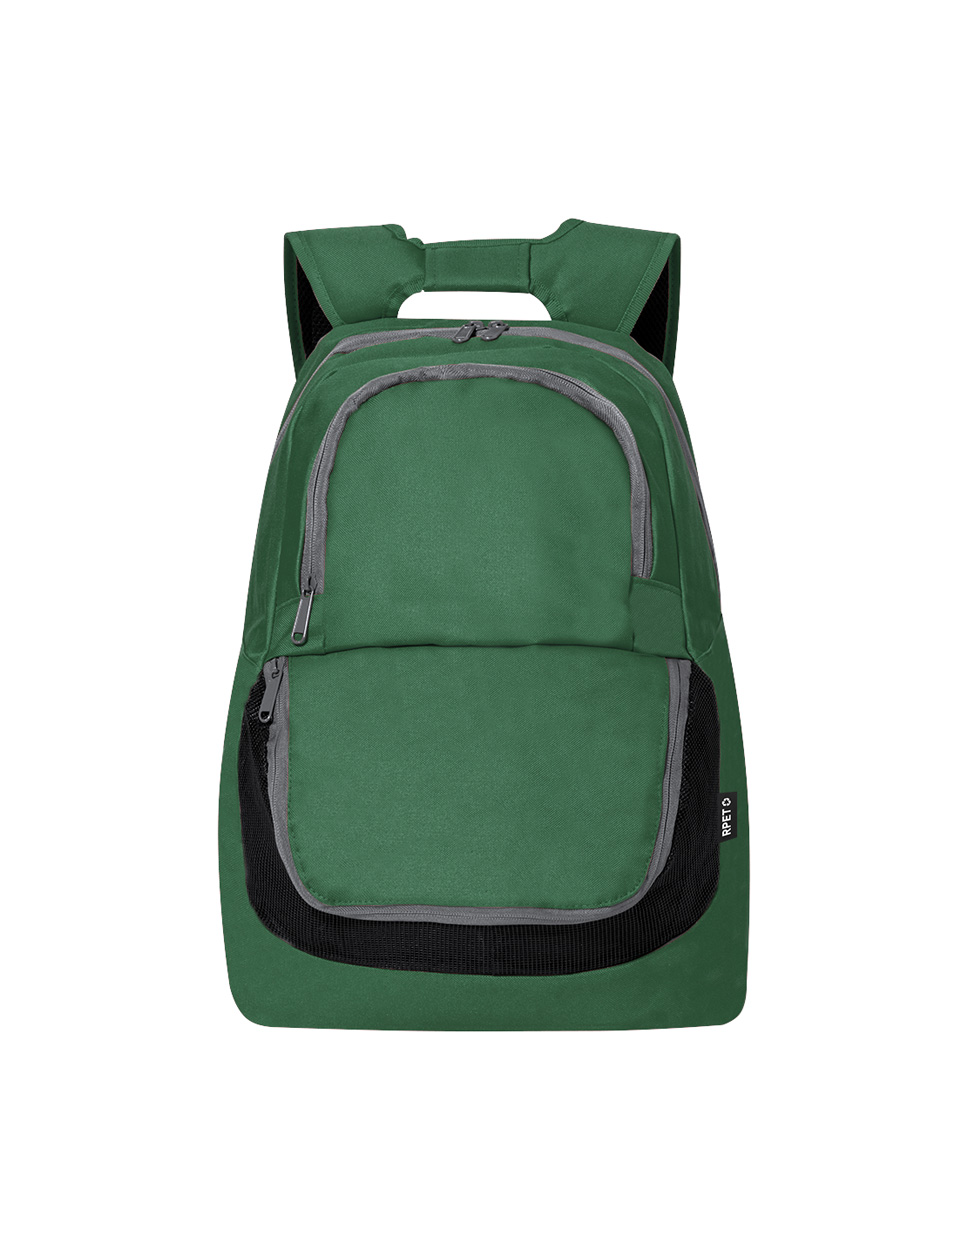 He lost his backpack - green